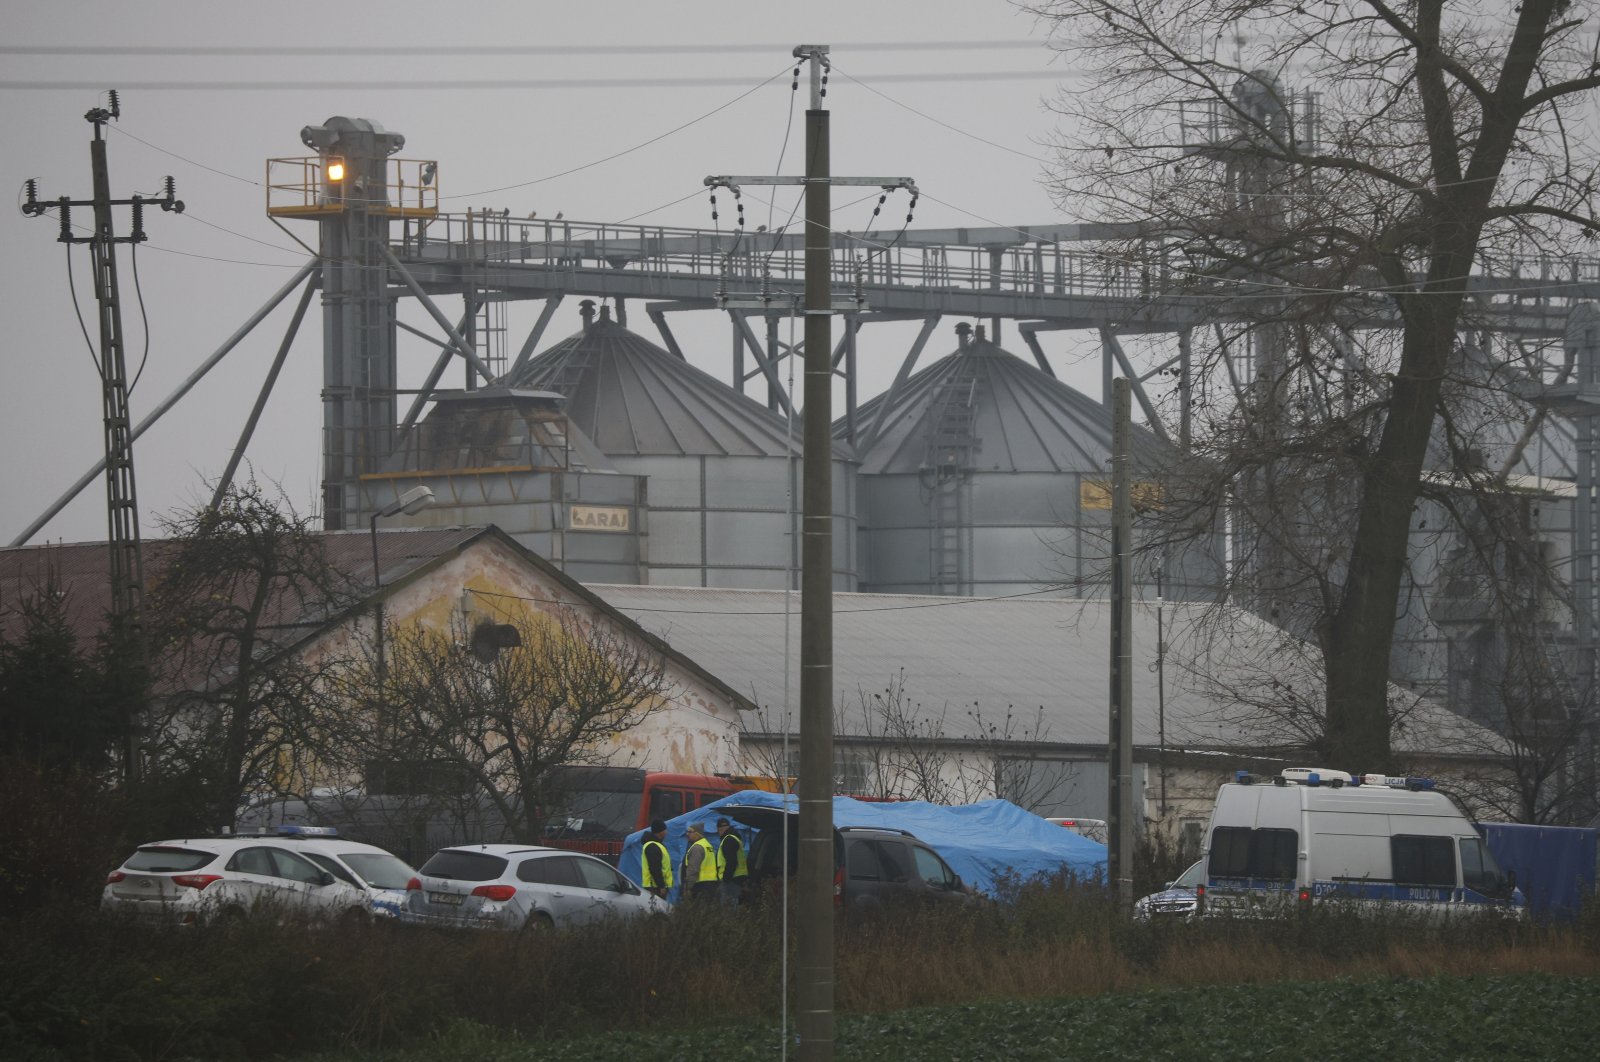 Police officers work outside a grain depot where two people were killed in a missile strike, Przewodow, Poland, Nov. 16, 2022. (AP Photo)